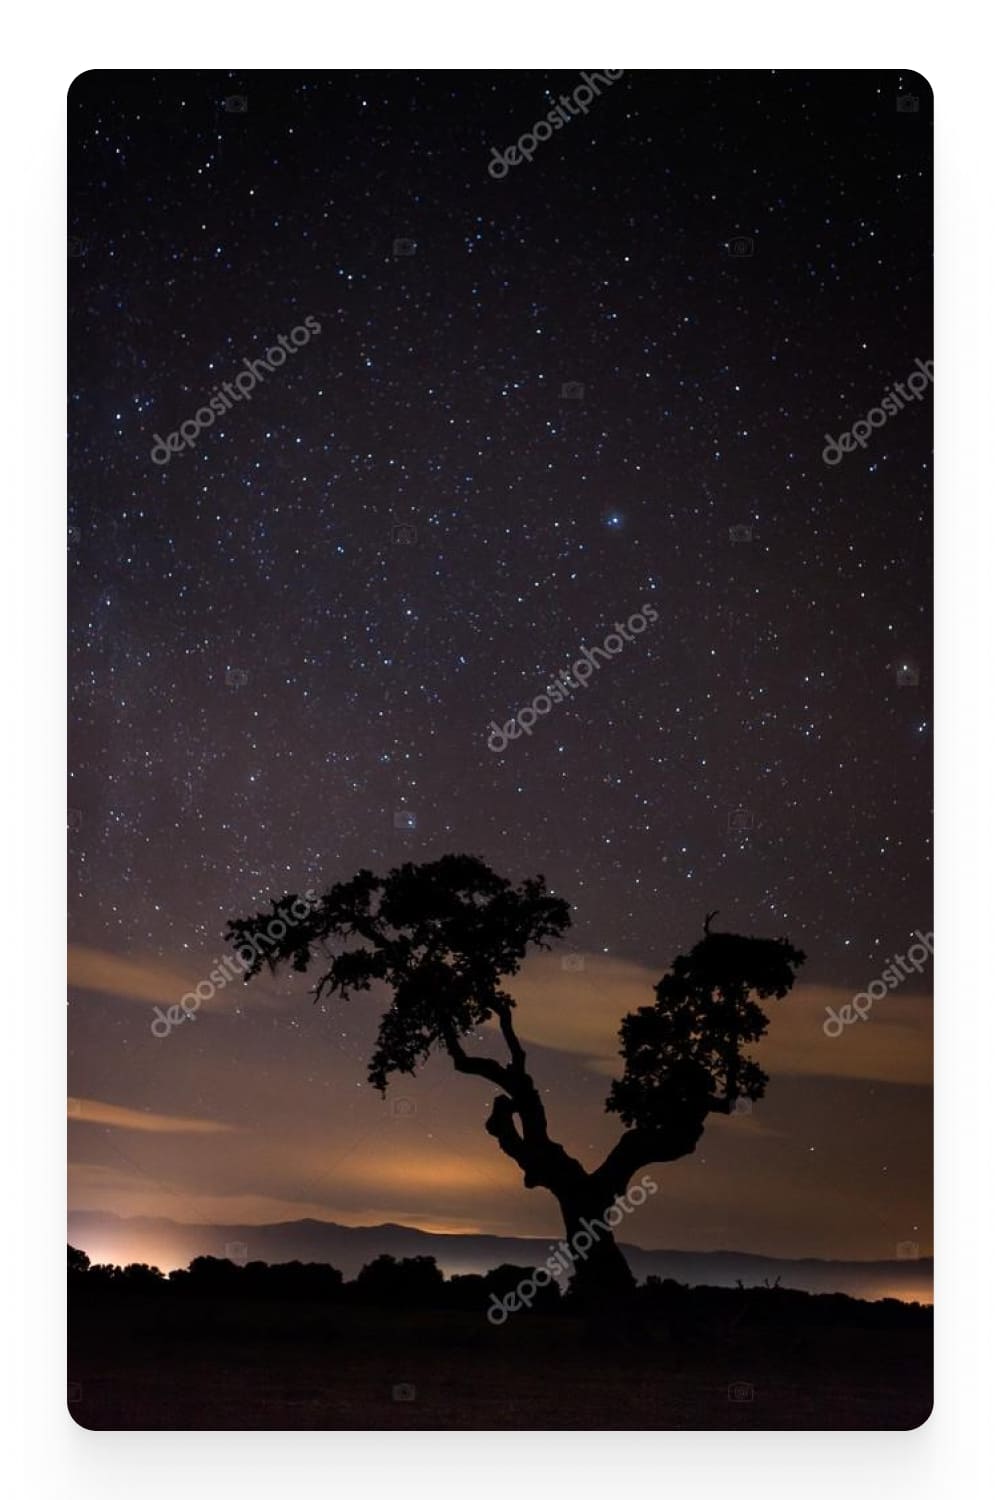 Photo of a tree against the background of a starry sky.